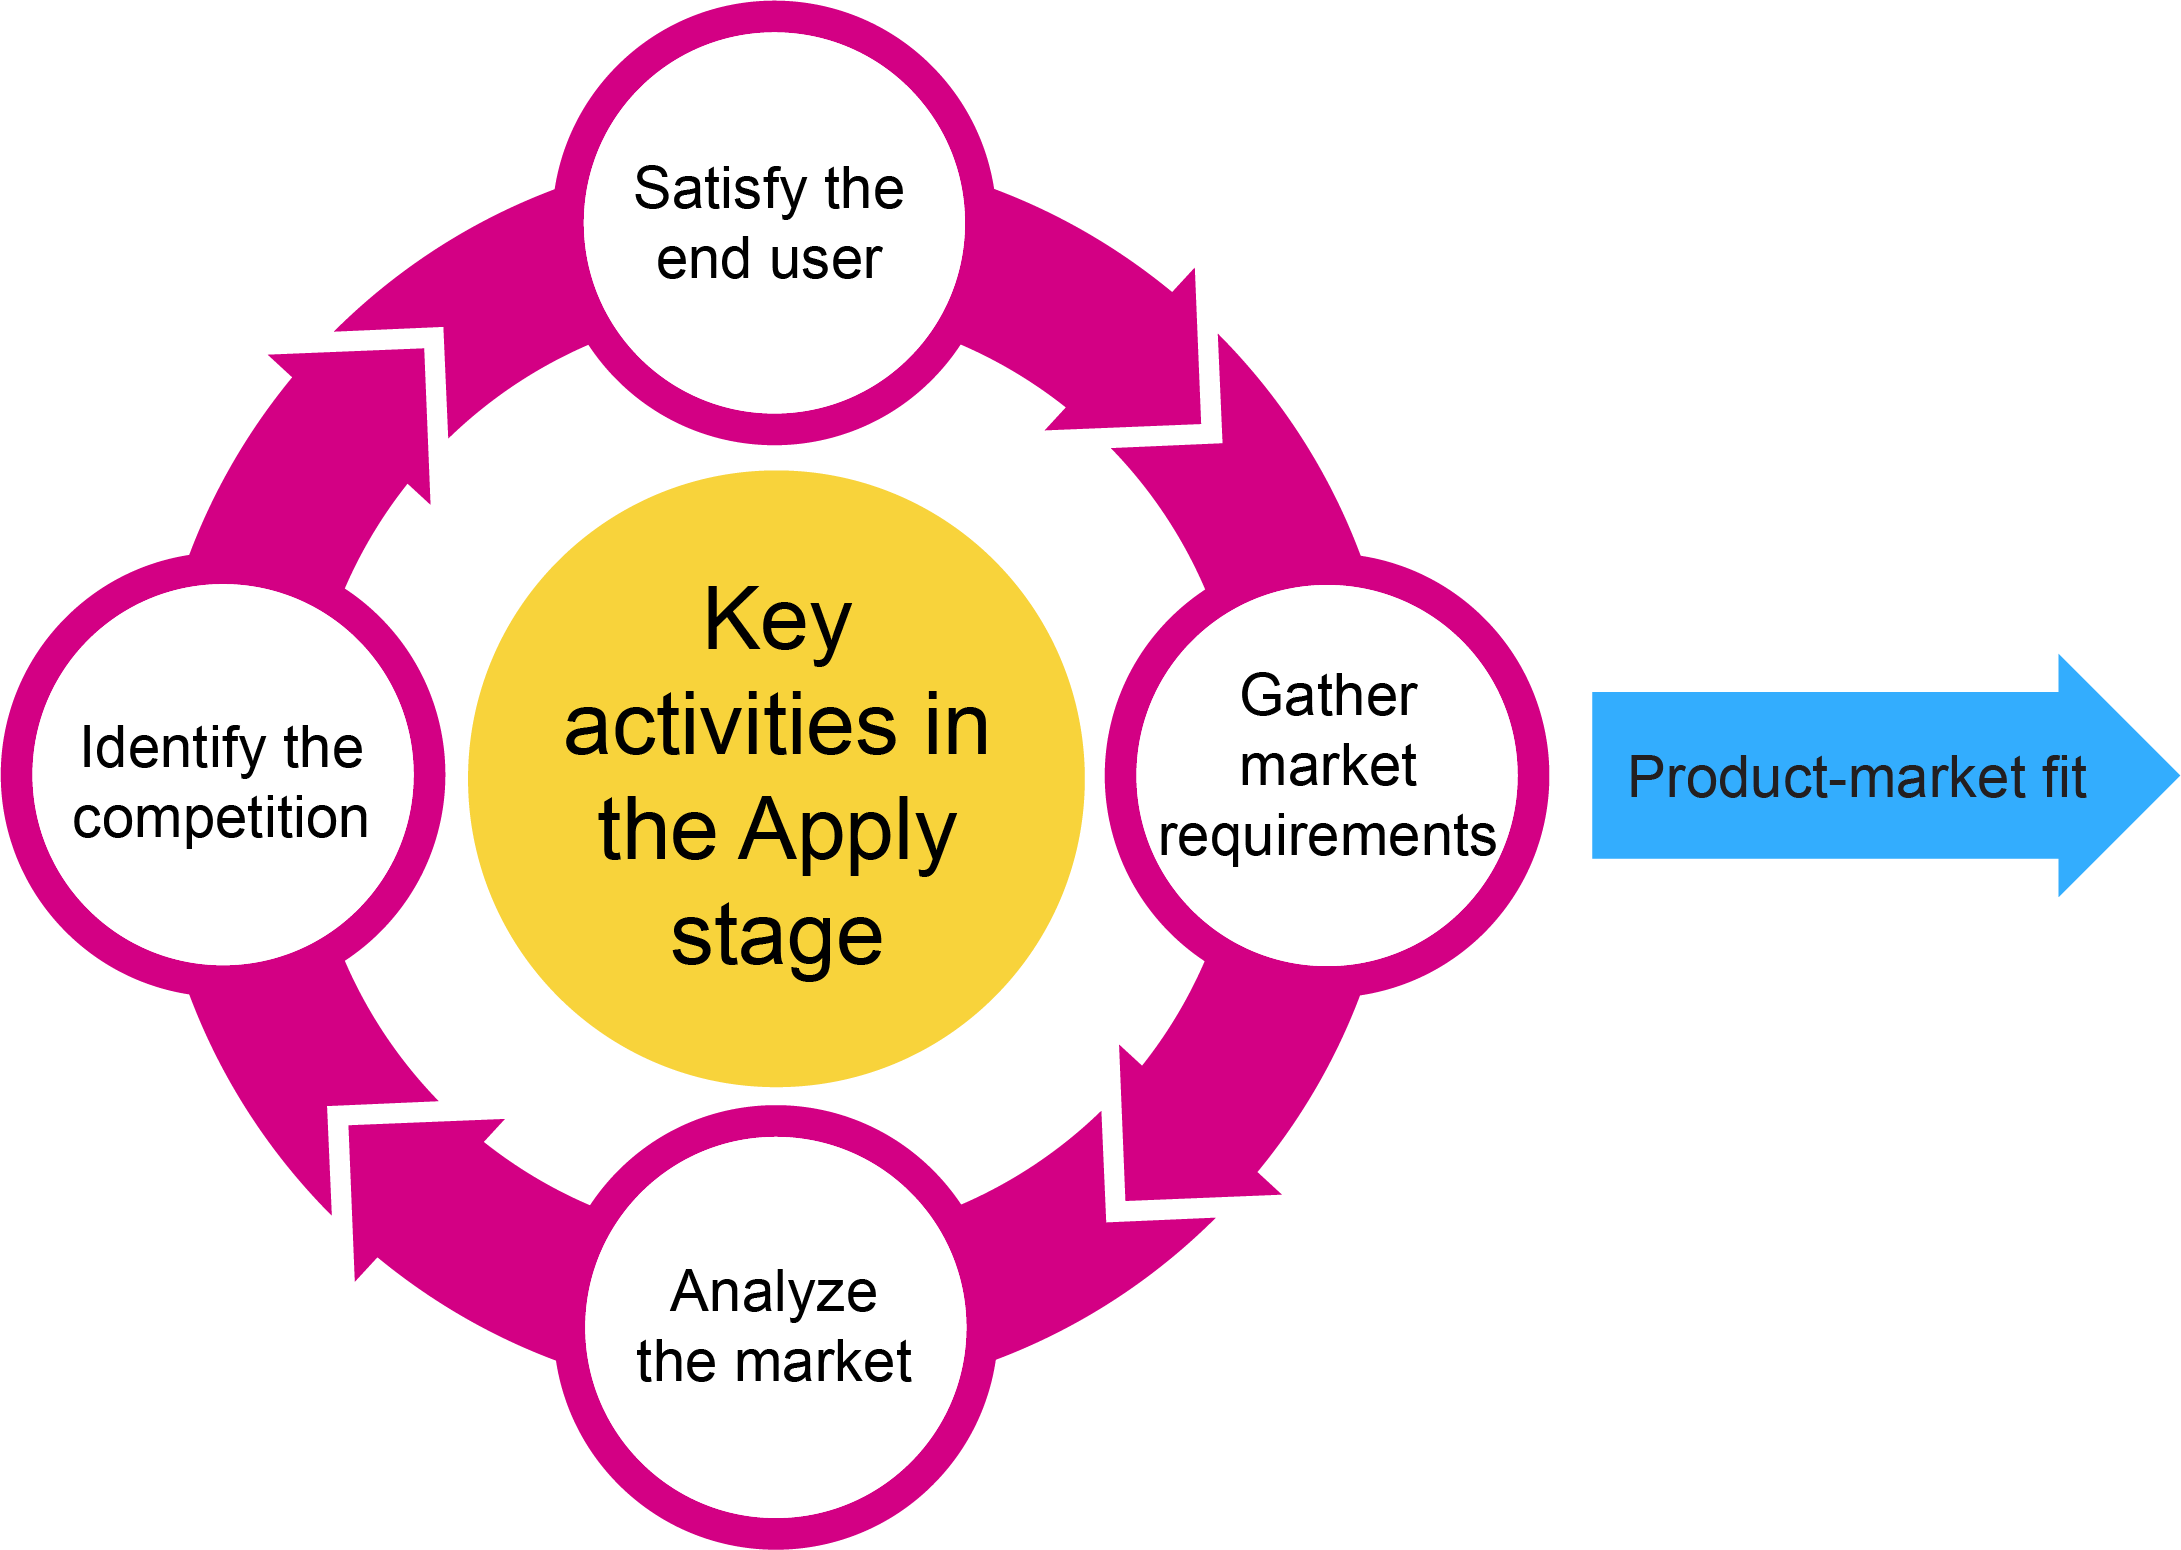 Key activities in the Apply stage